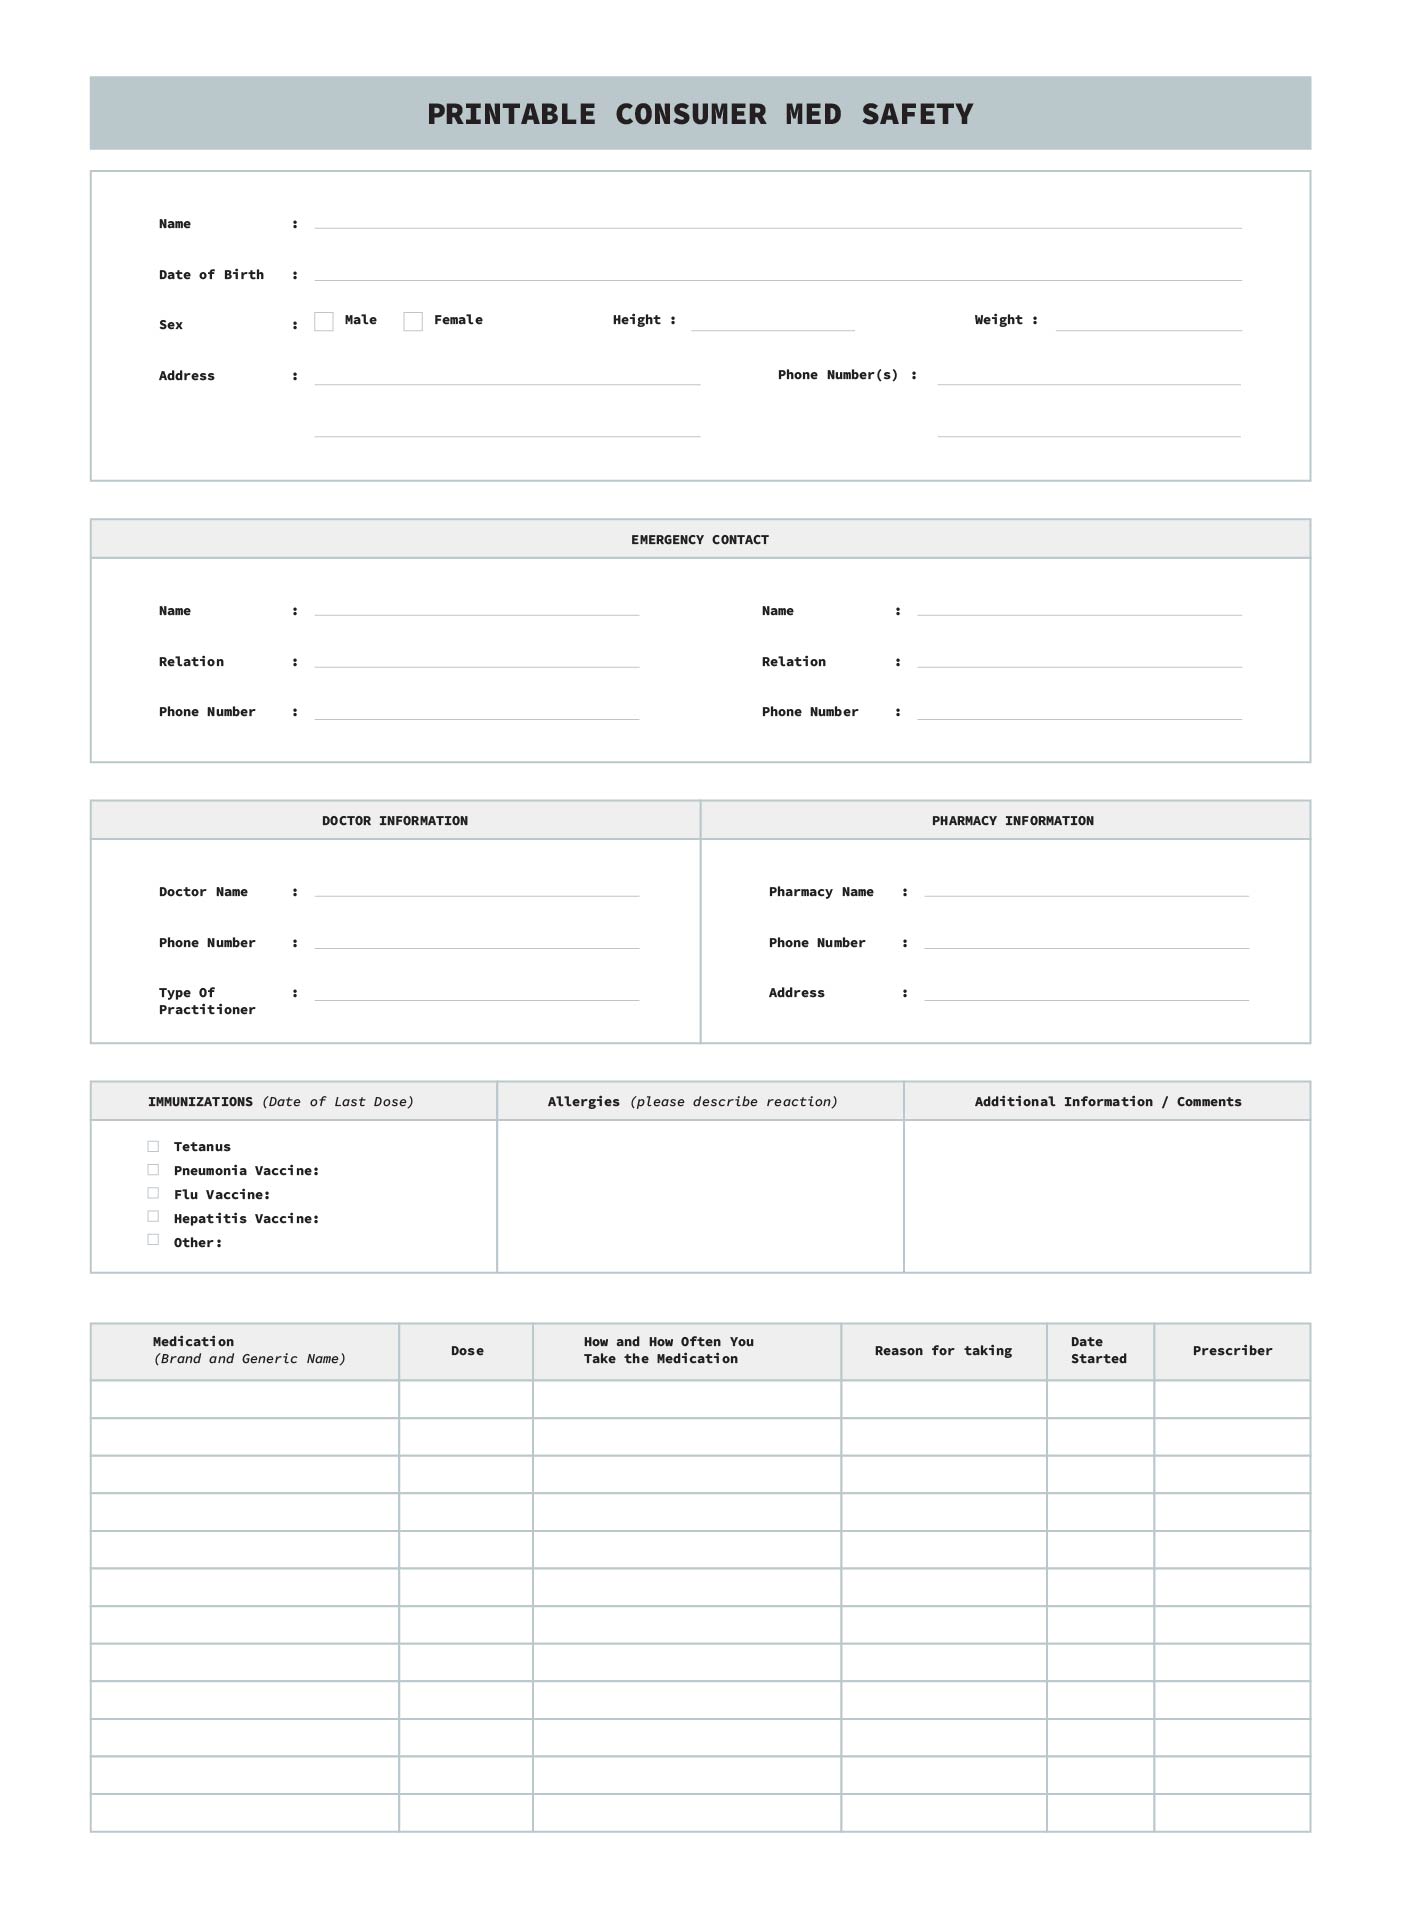 Printable Consumer Med Safety Template